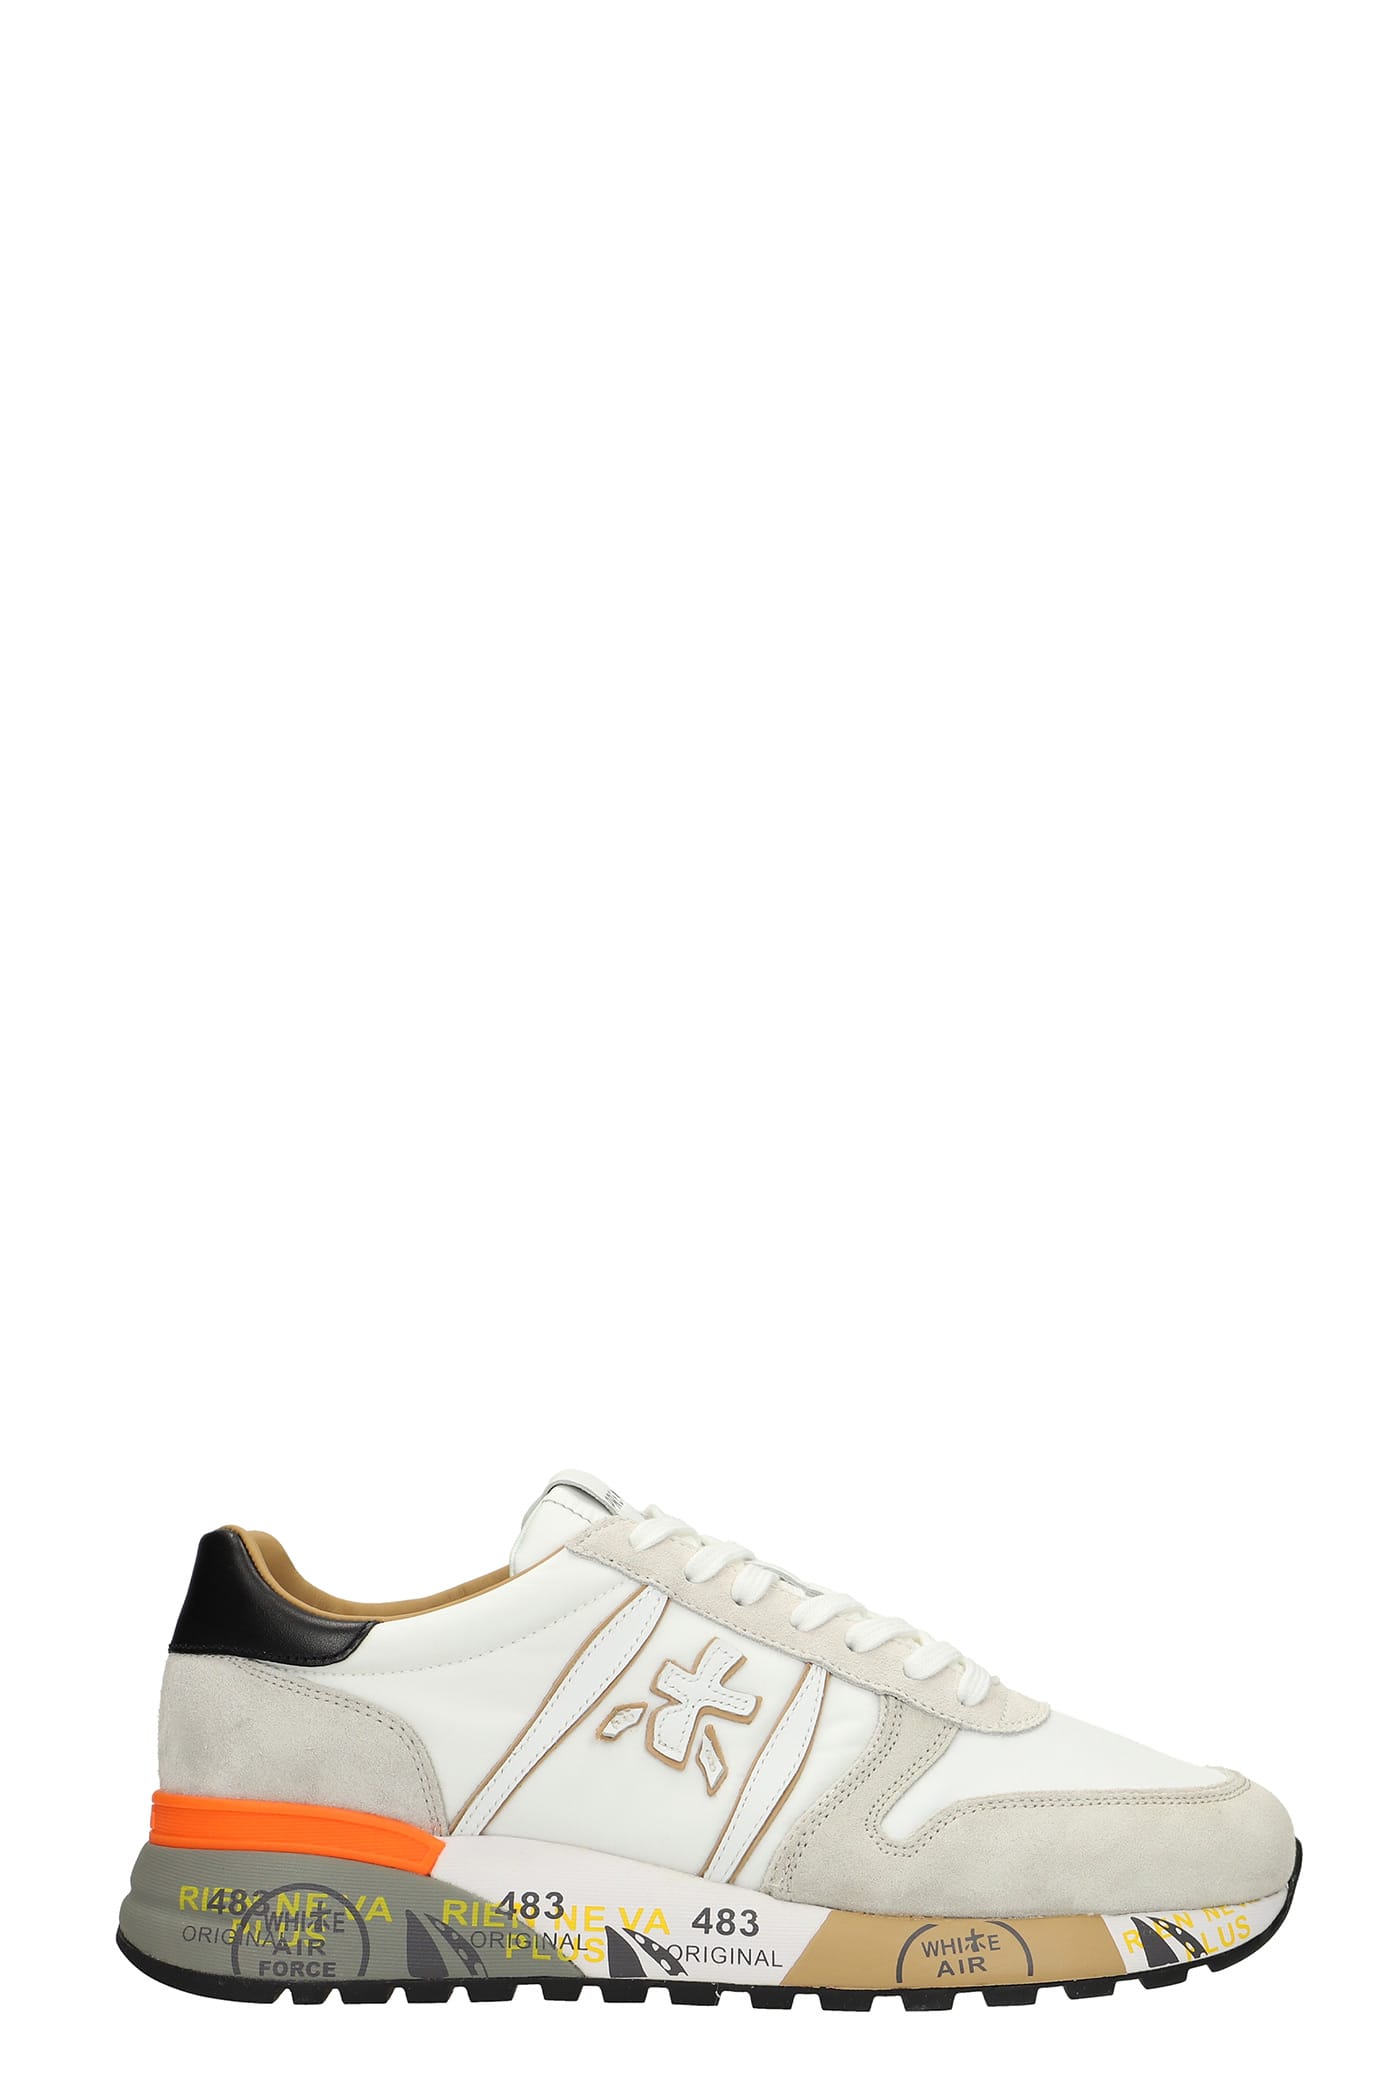 Premiata Lander Sneakers In White Suede And Fabric